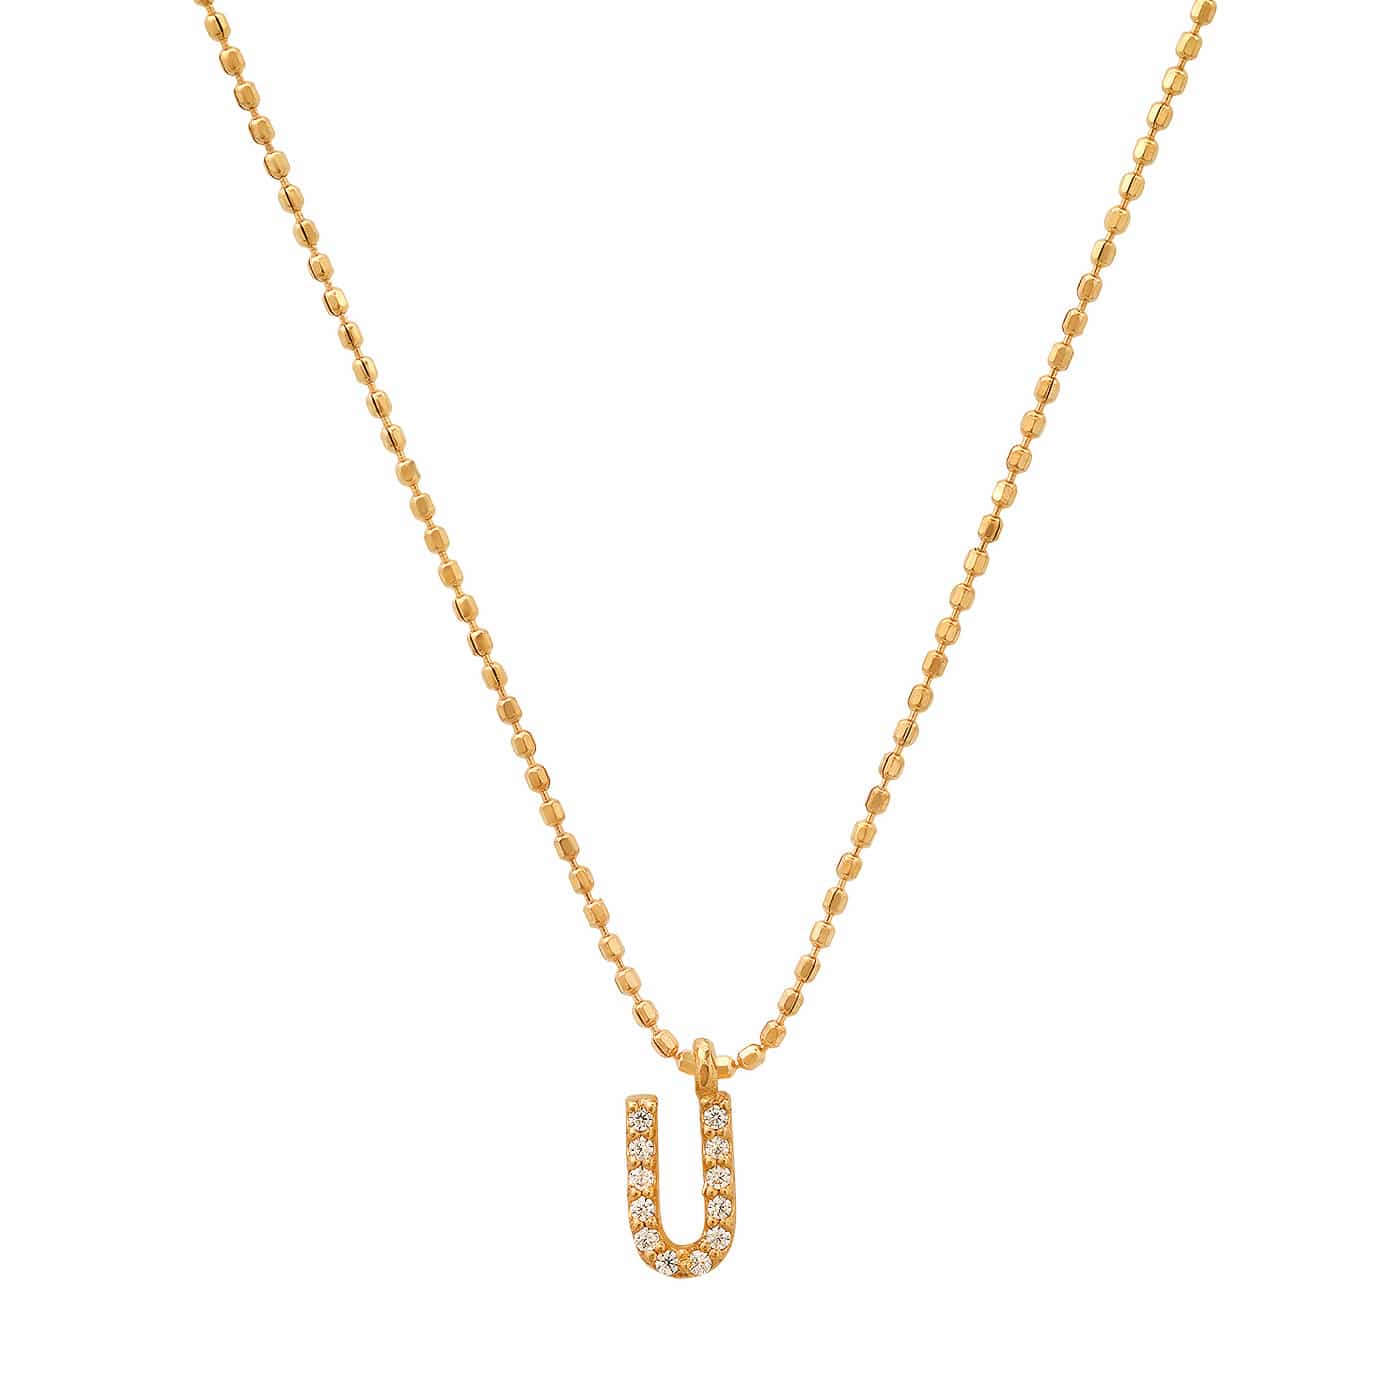 TAI JEWELRY Necklace U Pave Initial Ball Chain Necklace